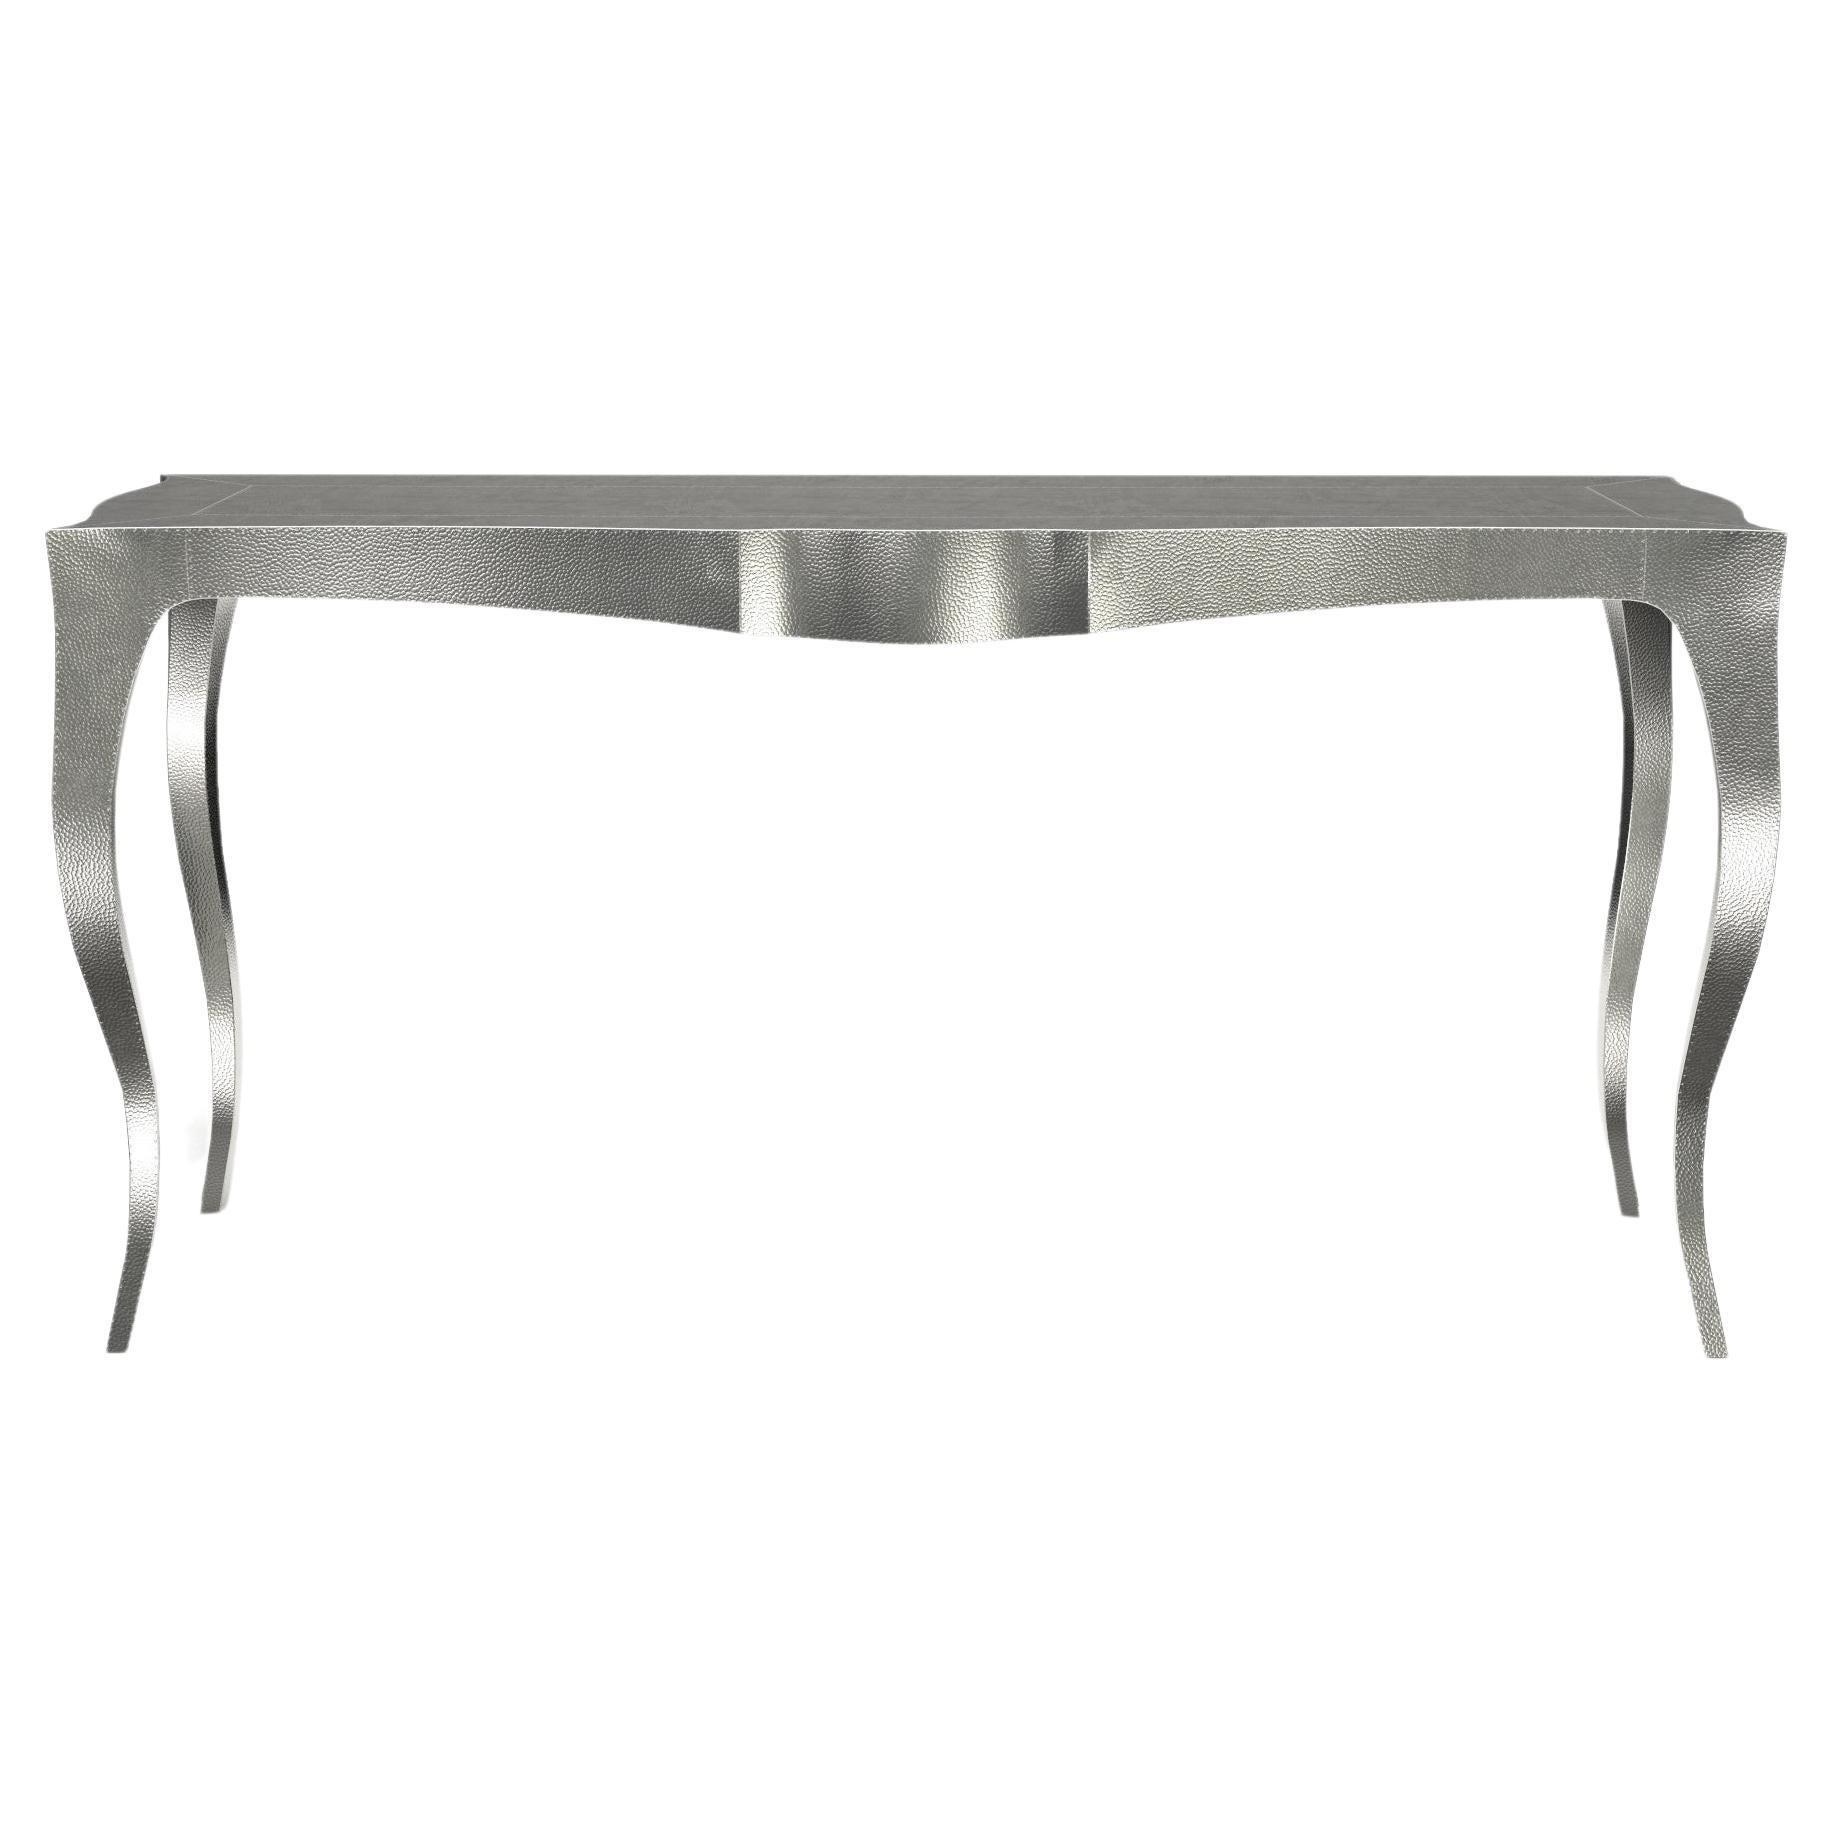 Louise Console Art Deco Nesting and Stacking Tables Mid. Hammered White Bronze